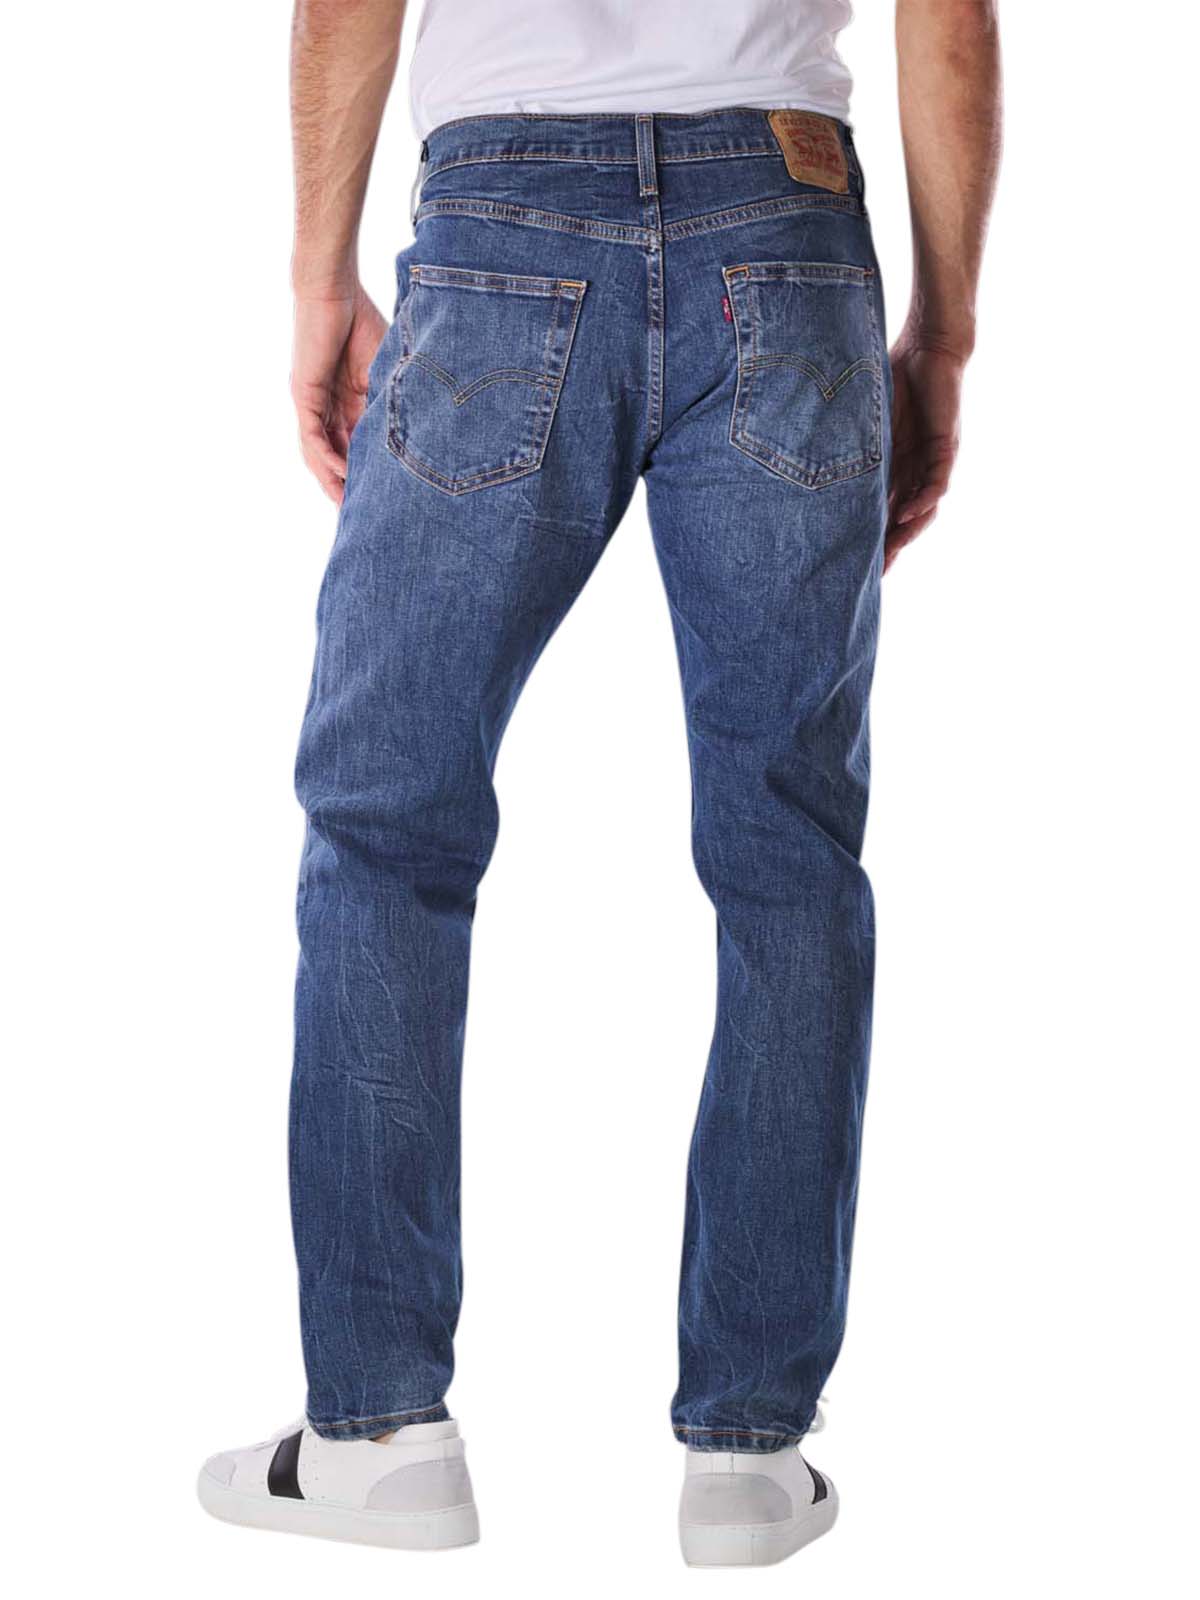 Levi's 502 Jeans Tapered Fit tanger Levi's Men's Jeans | Free Shipping on   - SIMPLY LOOK GOOD